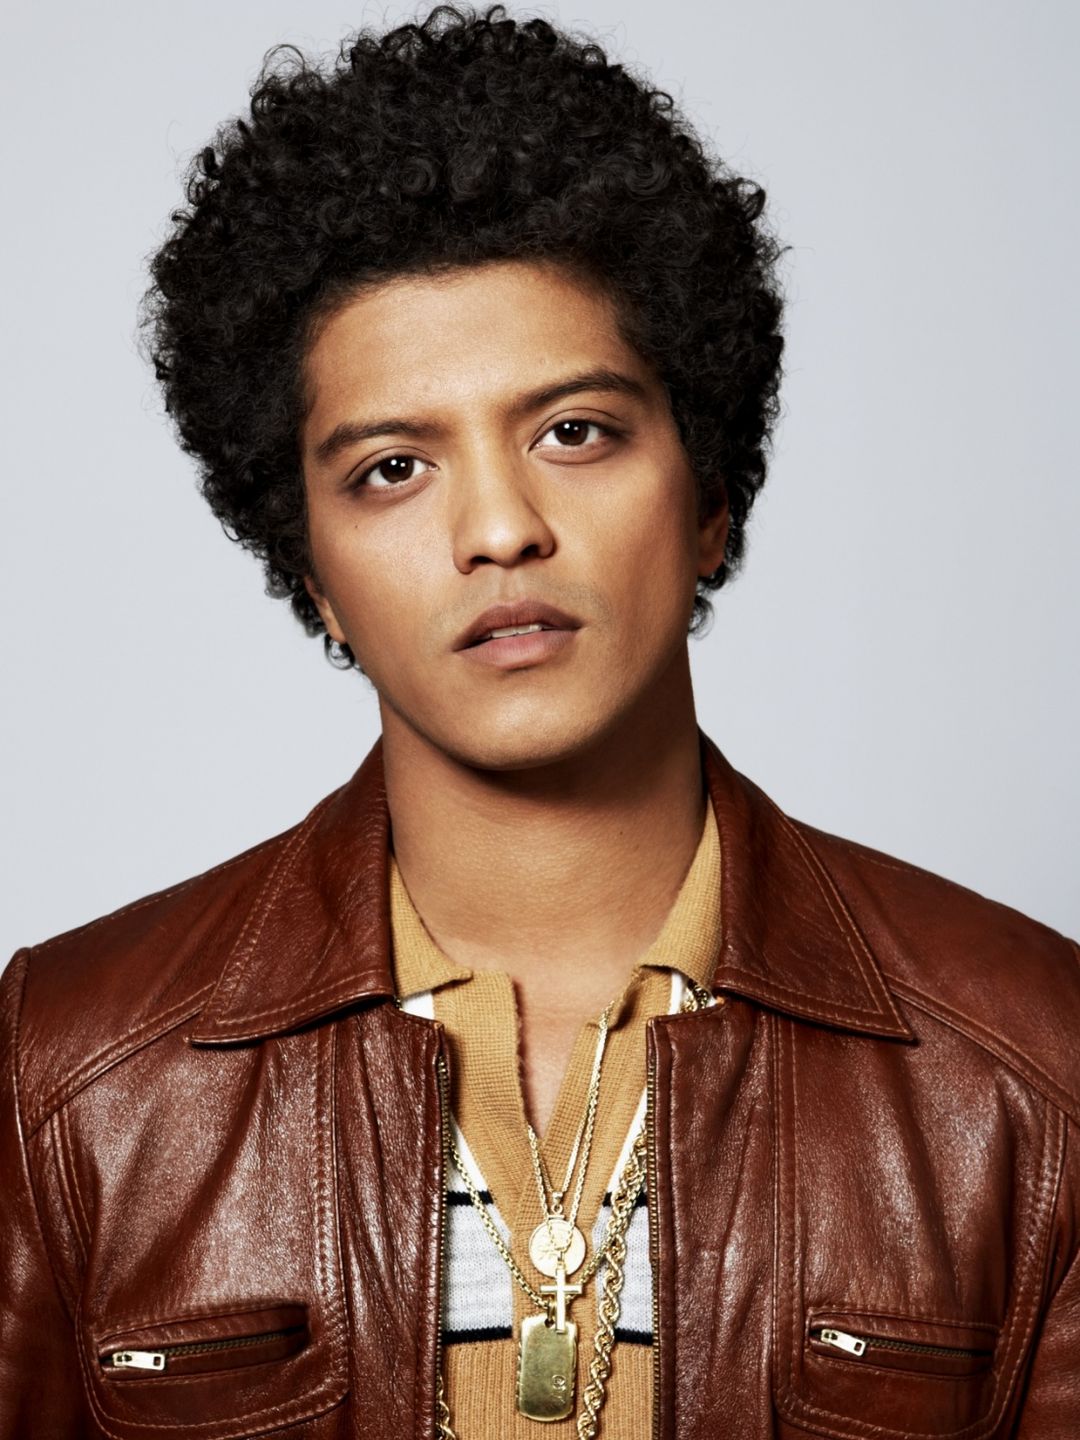 Bruno Mars young age